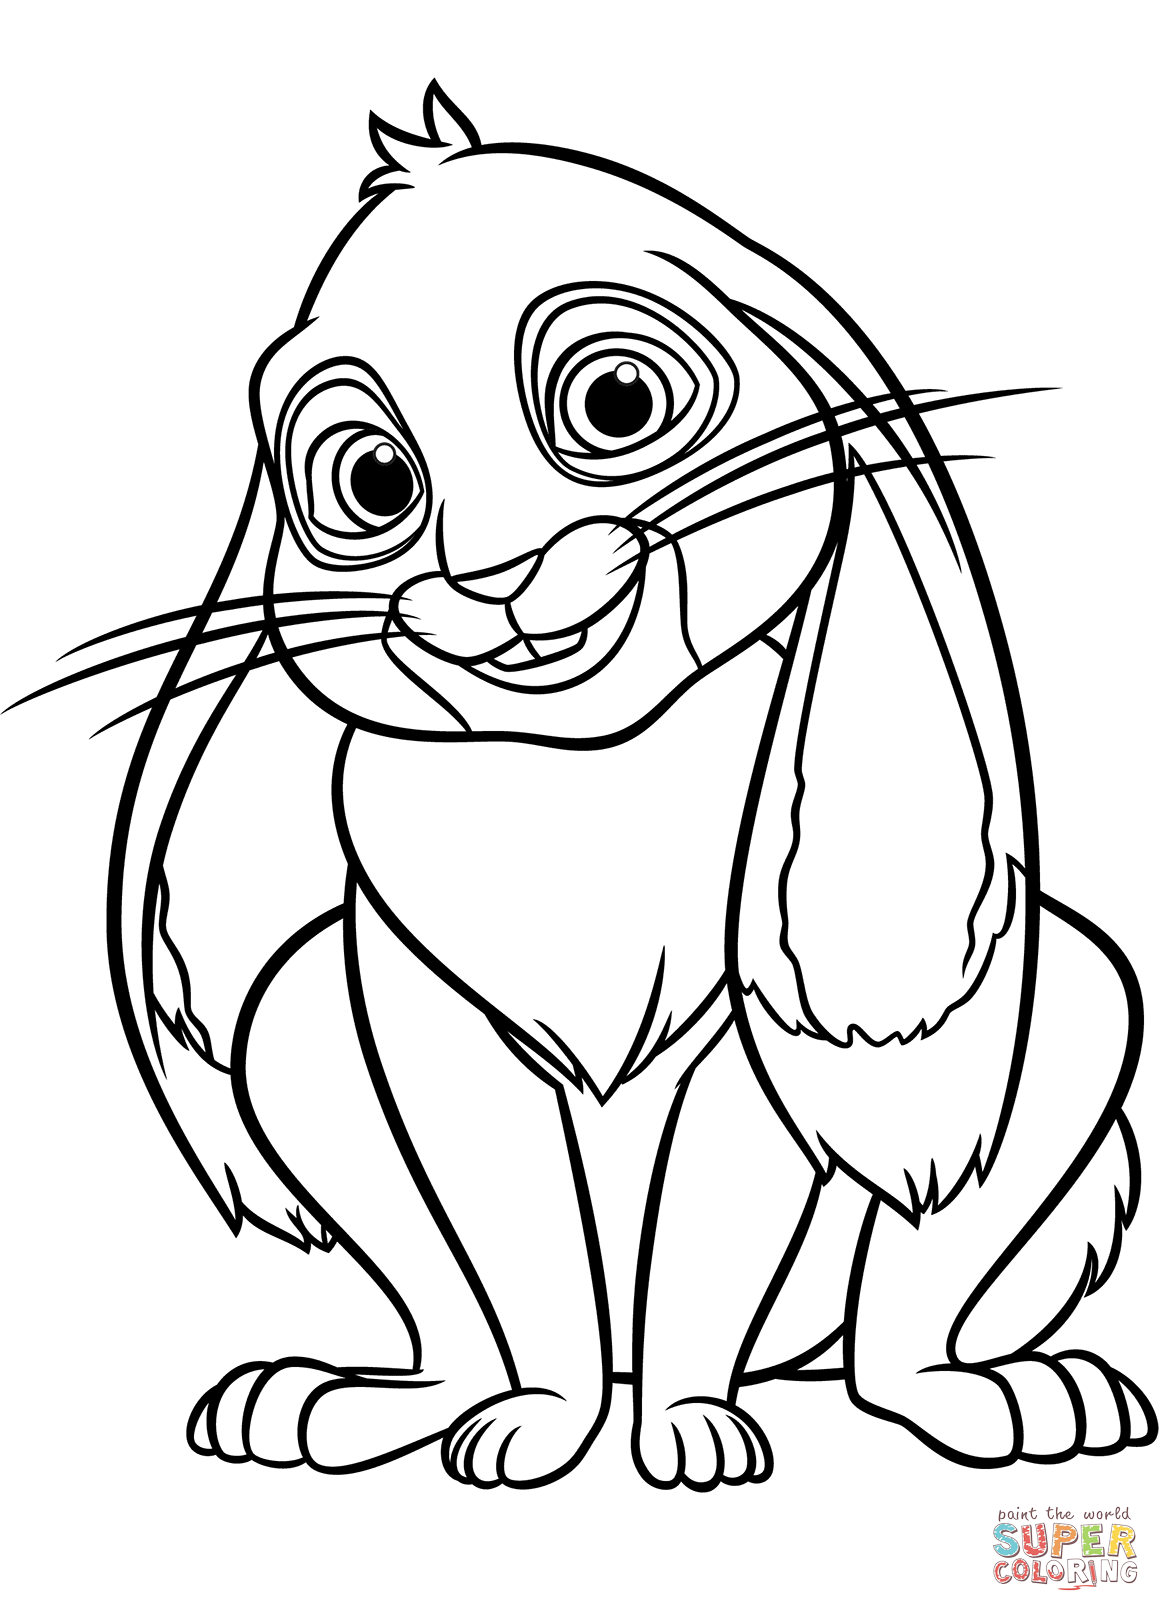 Clover the rabbit from sofia the first coloring page free printable coloring pages